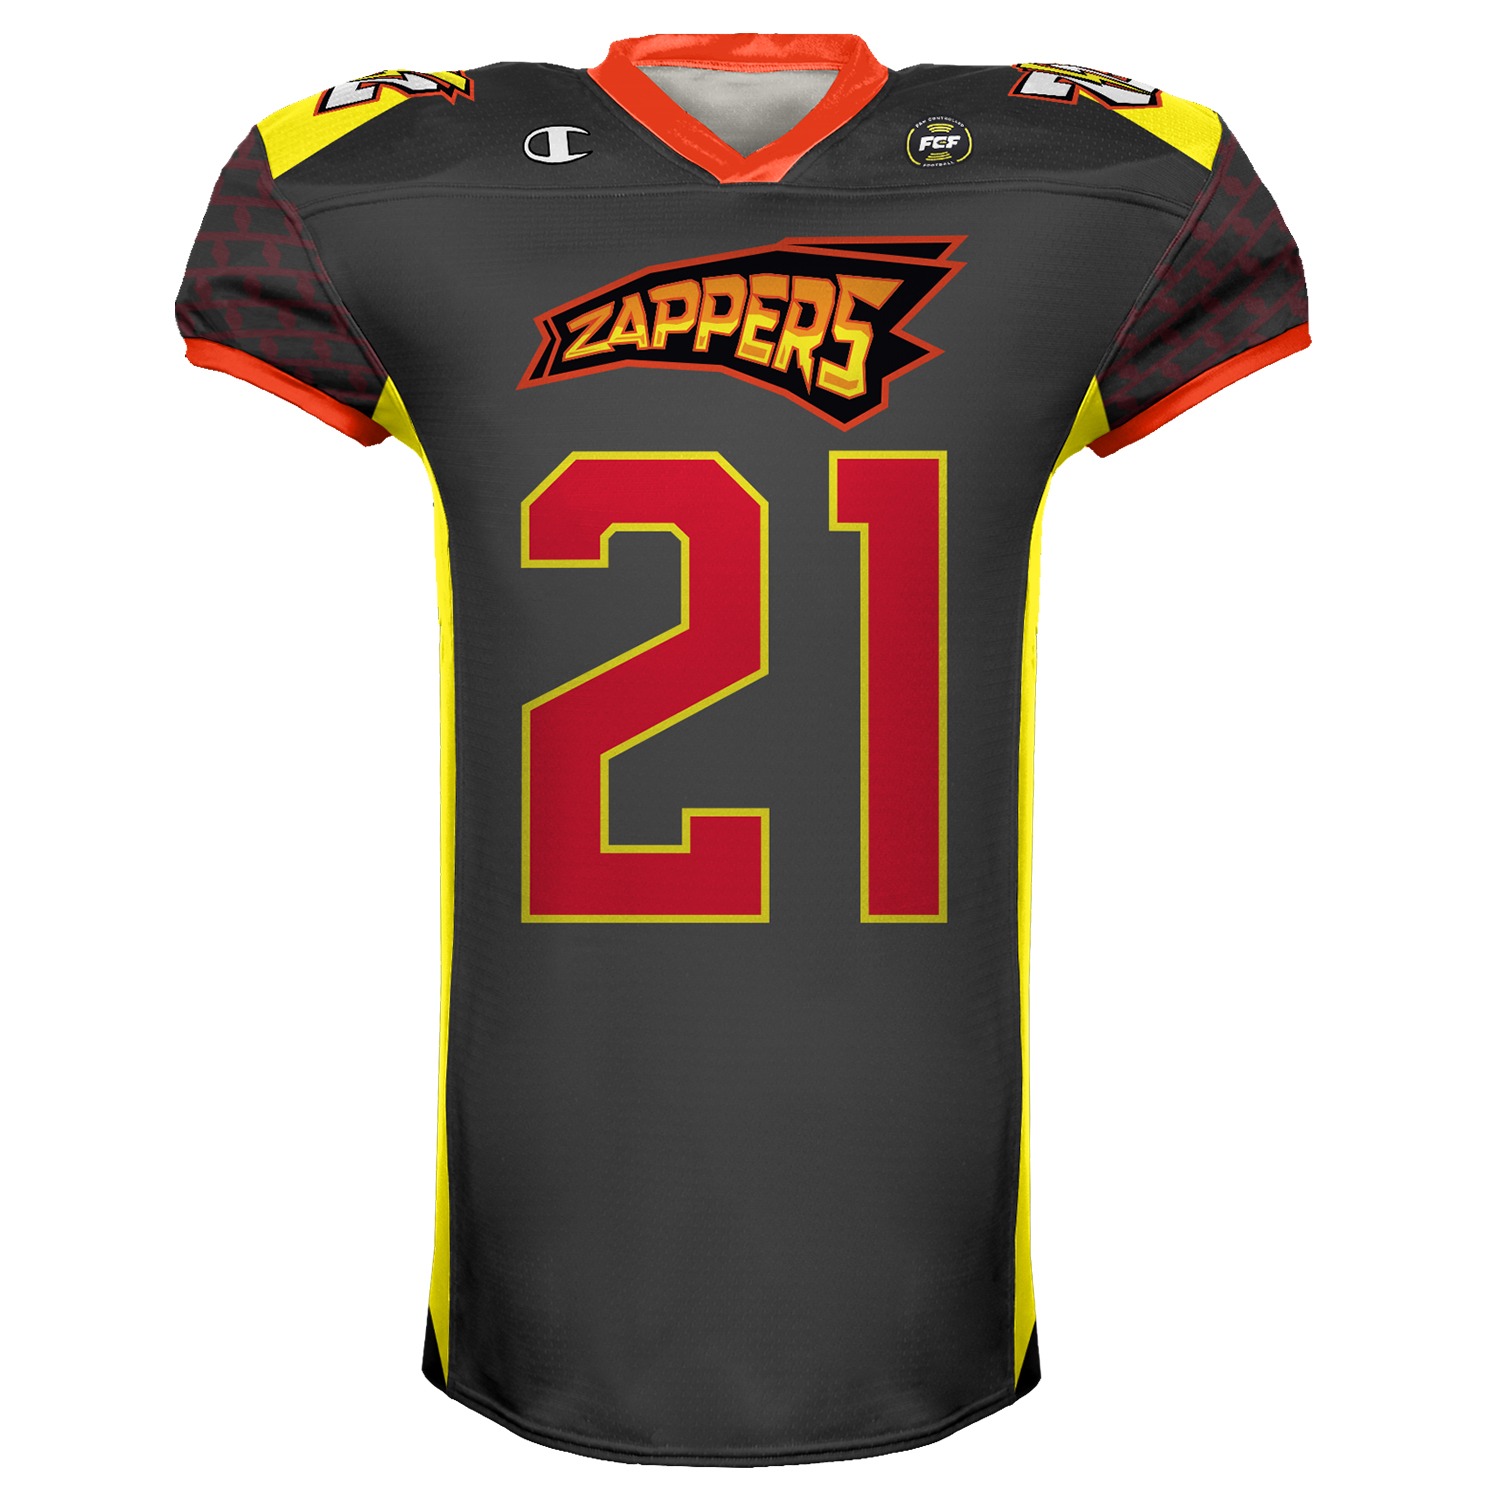 Zappers Authentic Champion Jersey